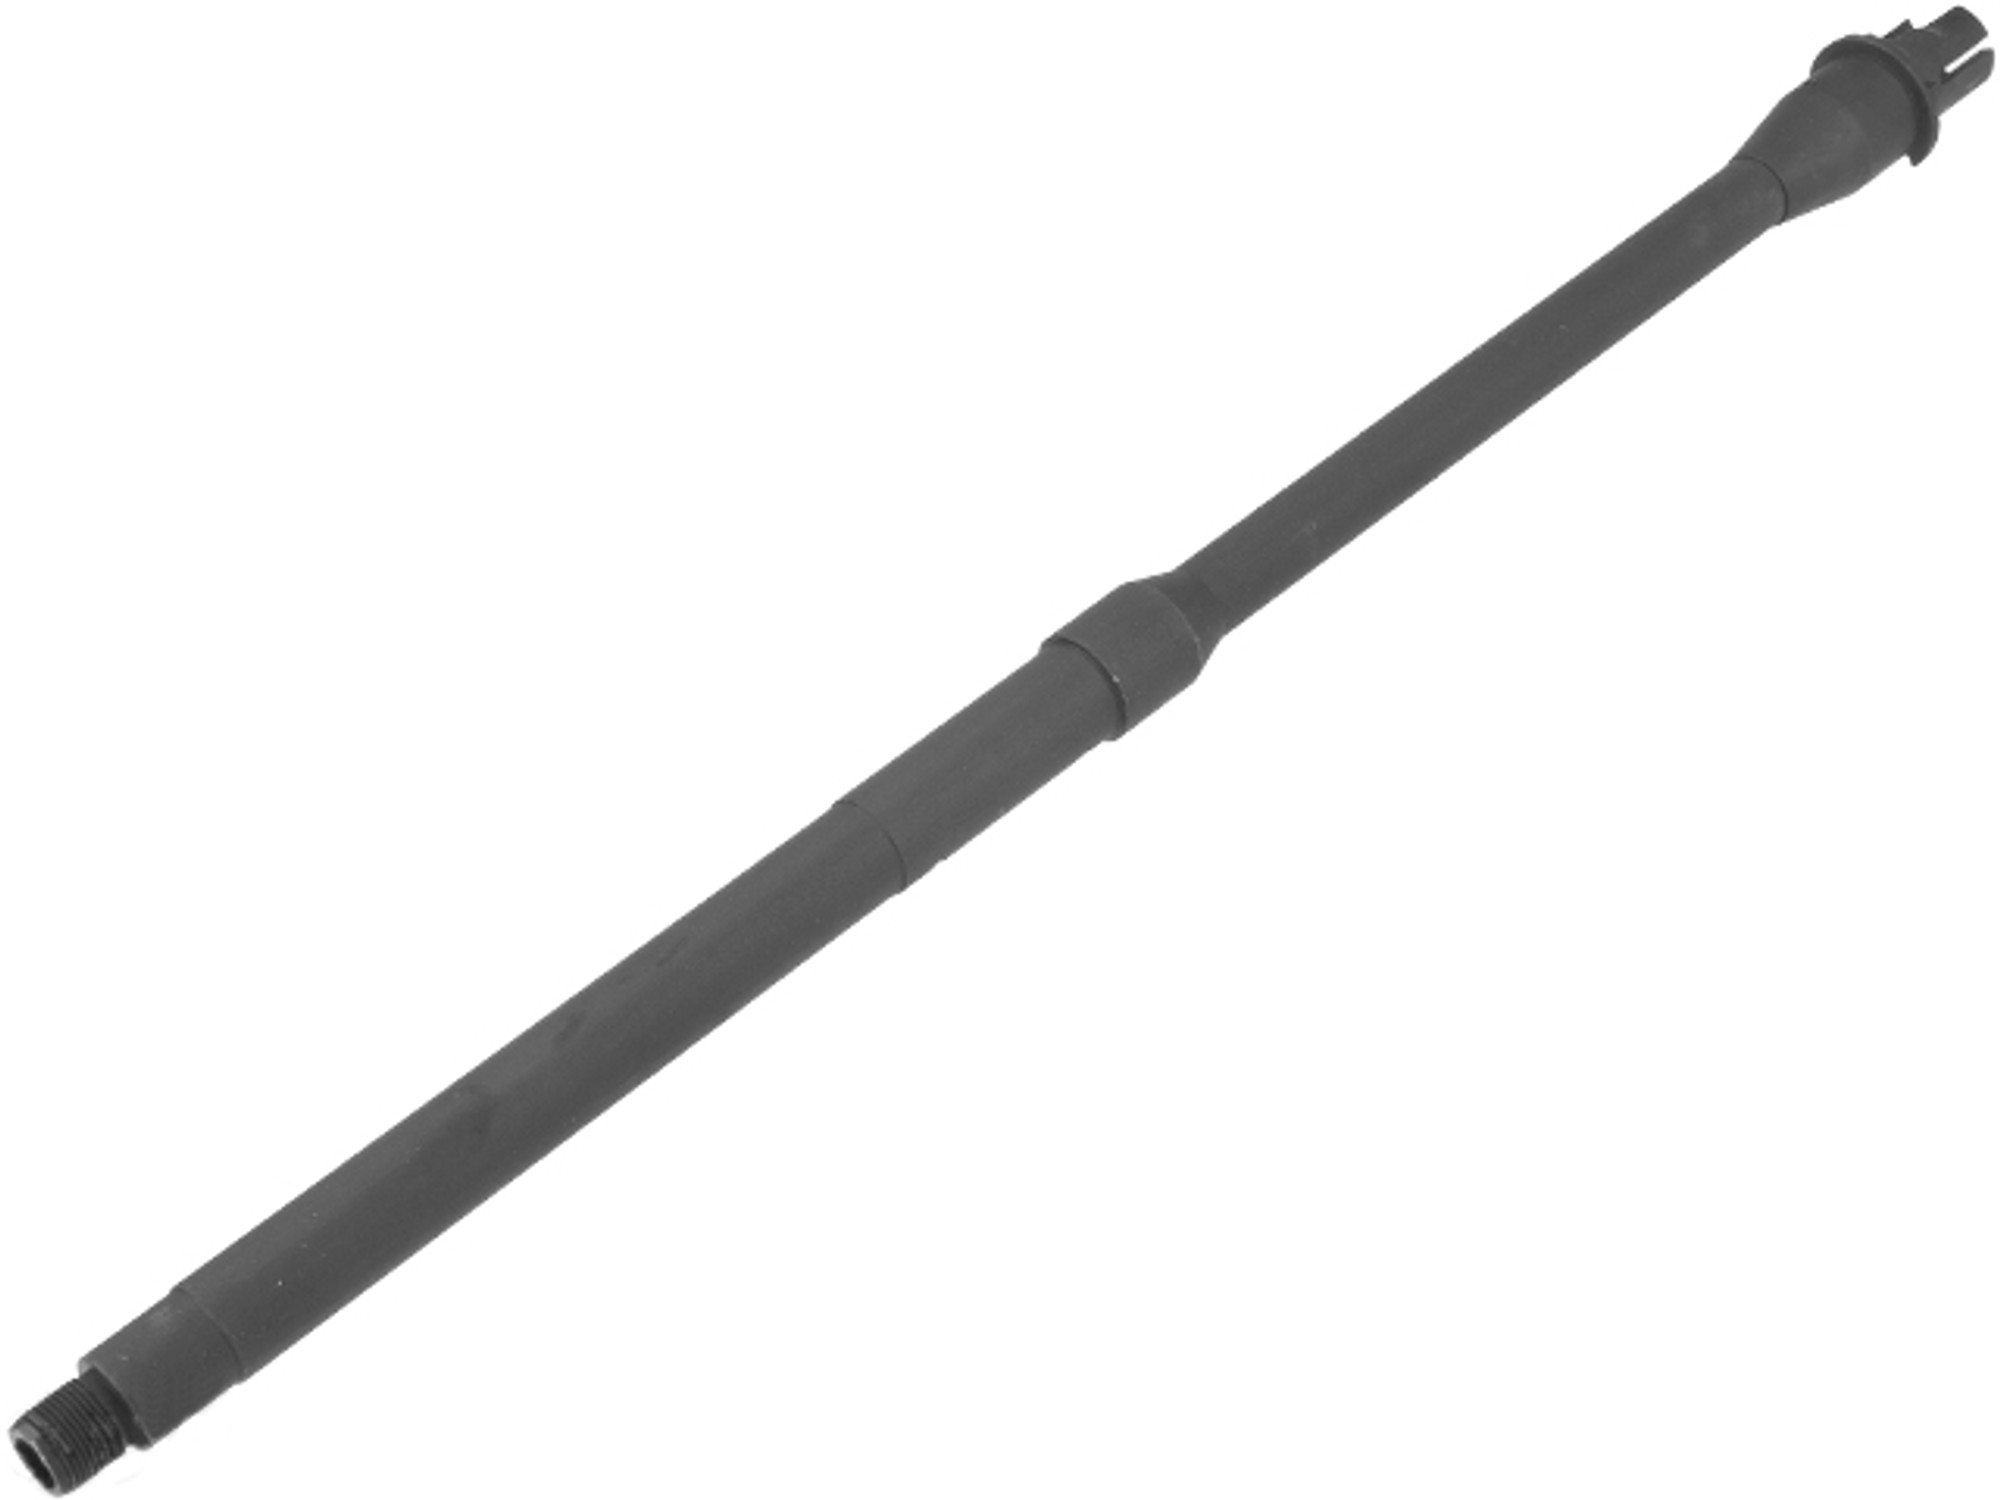 5KU 18" Mid-Length Profile Full Metal Outer Barrel for M4/M16 Series Airsoft AEGs - Black